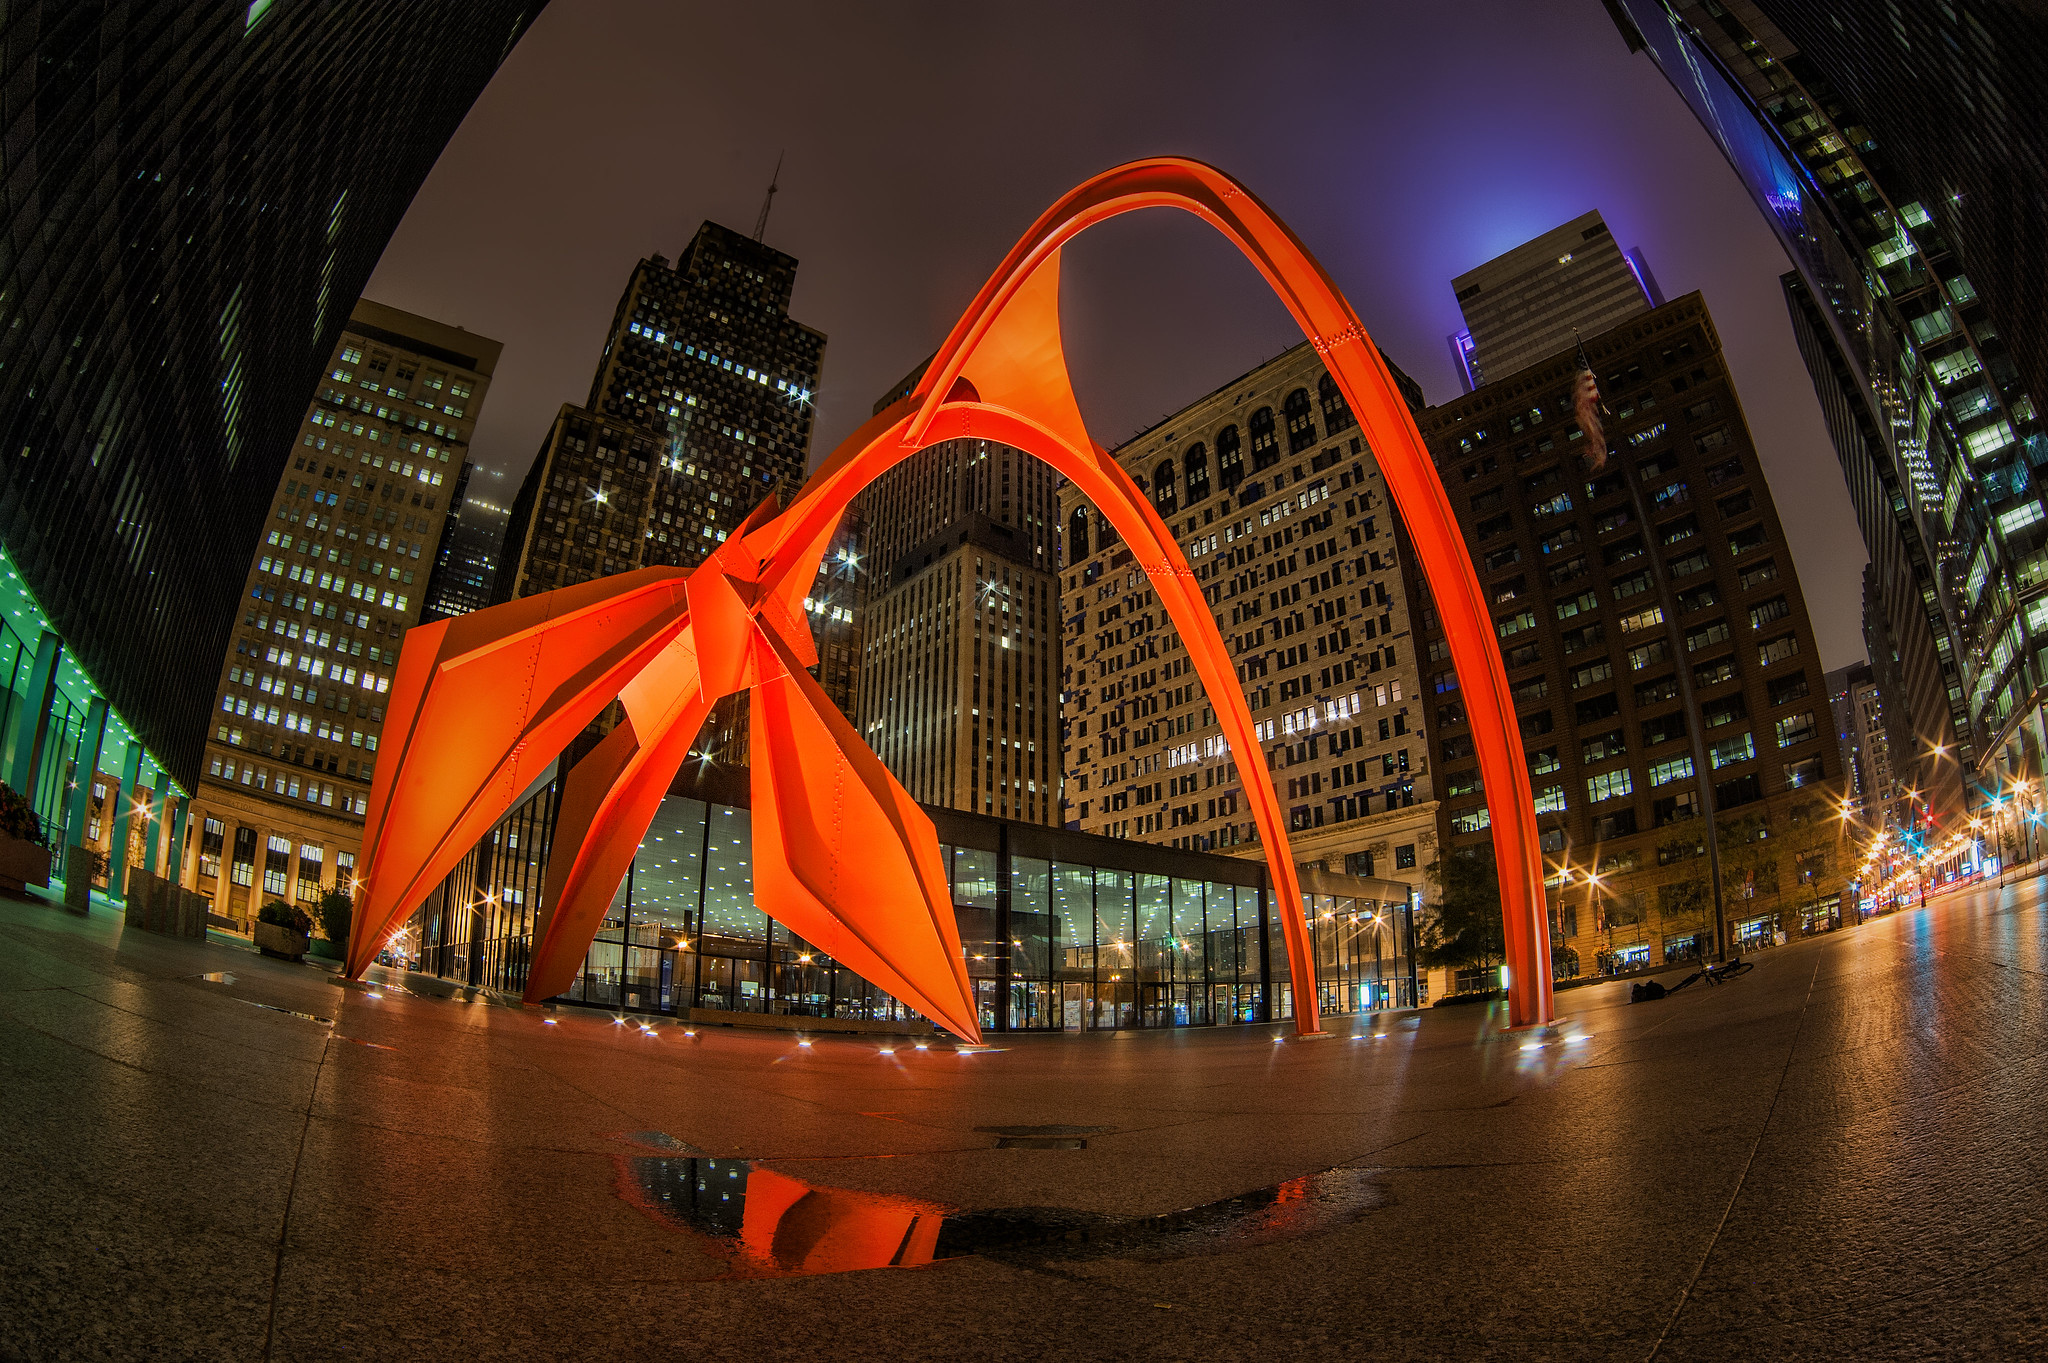 The Flamingo sits at 50 W Adams St. in downtown Chicago.